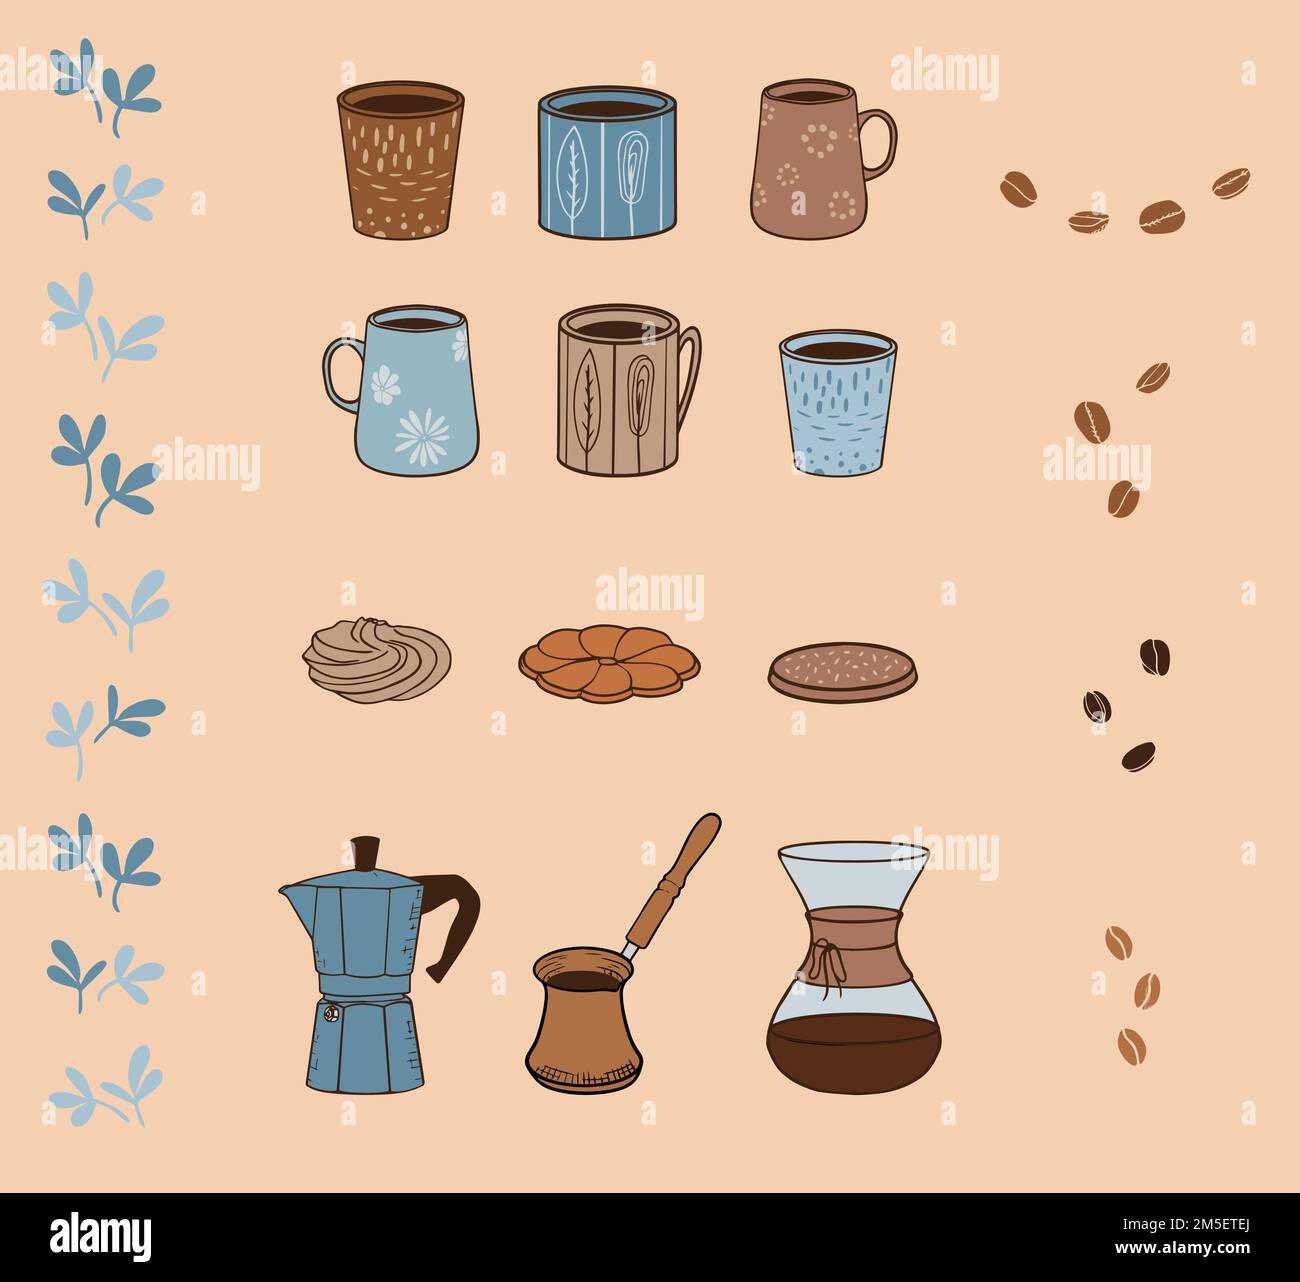 Coffee themed icons set. Beans, cups, cookies, manual brewers. Vector illustration. Great for coffee shop, cafe, fika accessories Stock Vector